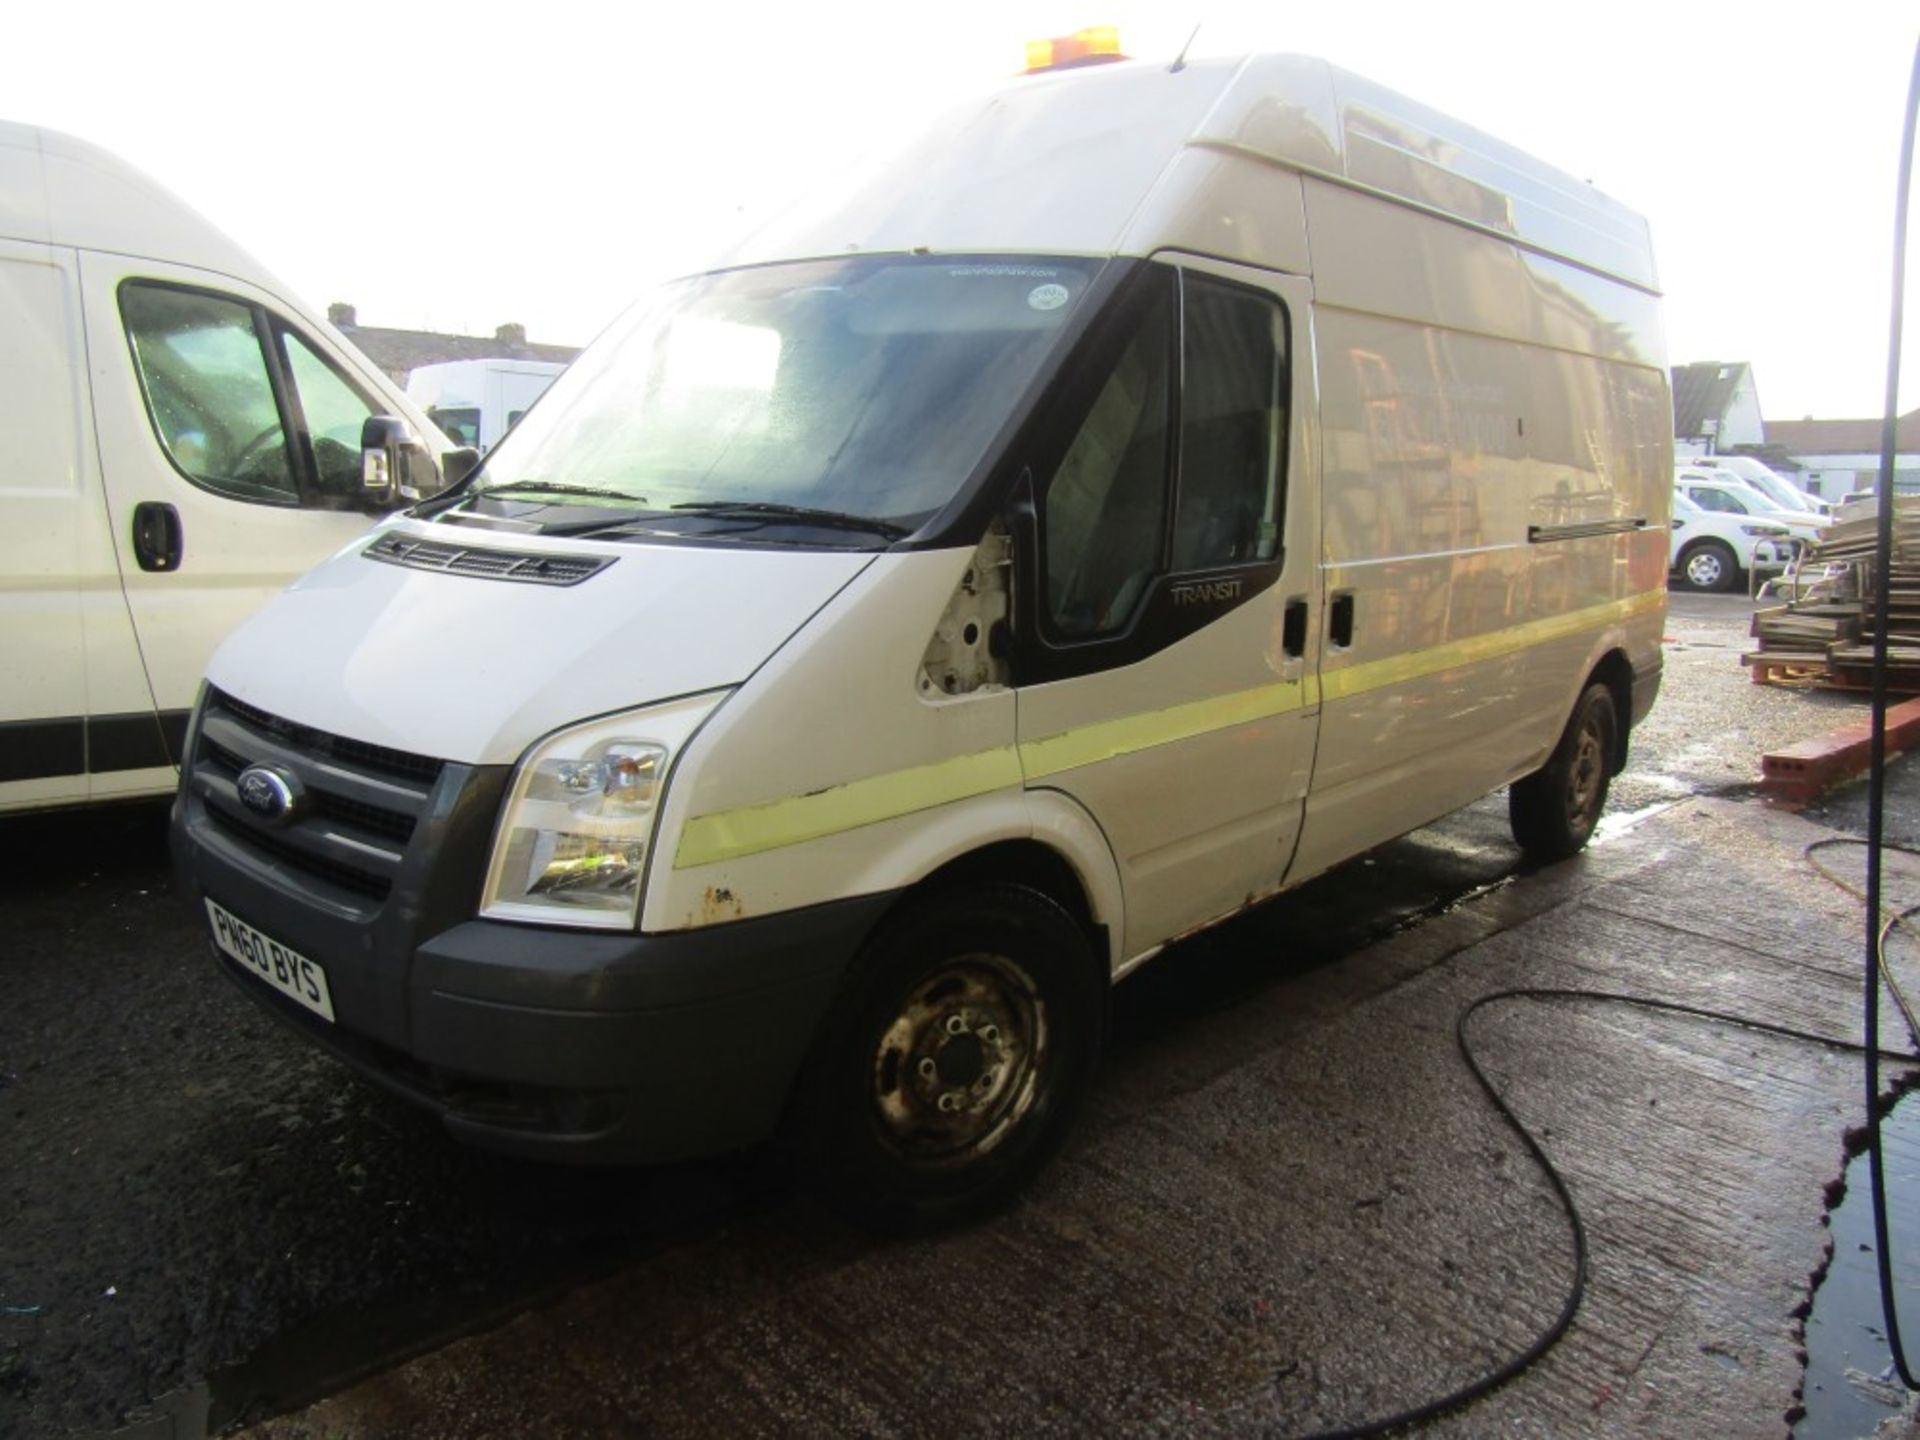 60 reg FORD TRANSIT 140 T350 LWB C/W PETROL COMPRESSOR IN REAR (NON RUNNER) (DIRECT COUNCIL) 1ST REG - Image 2 of 6